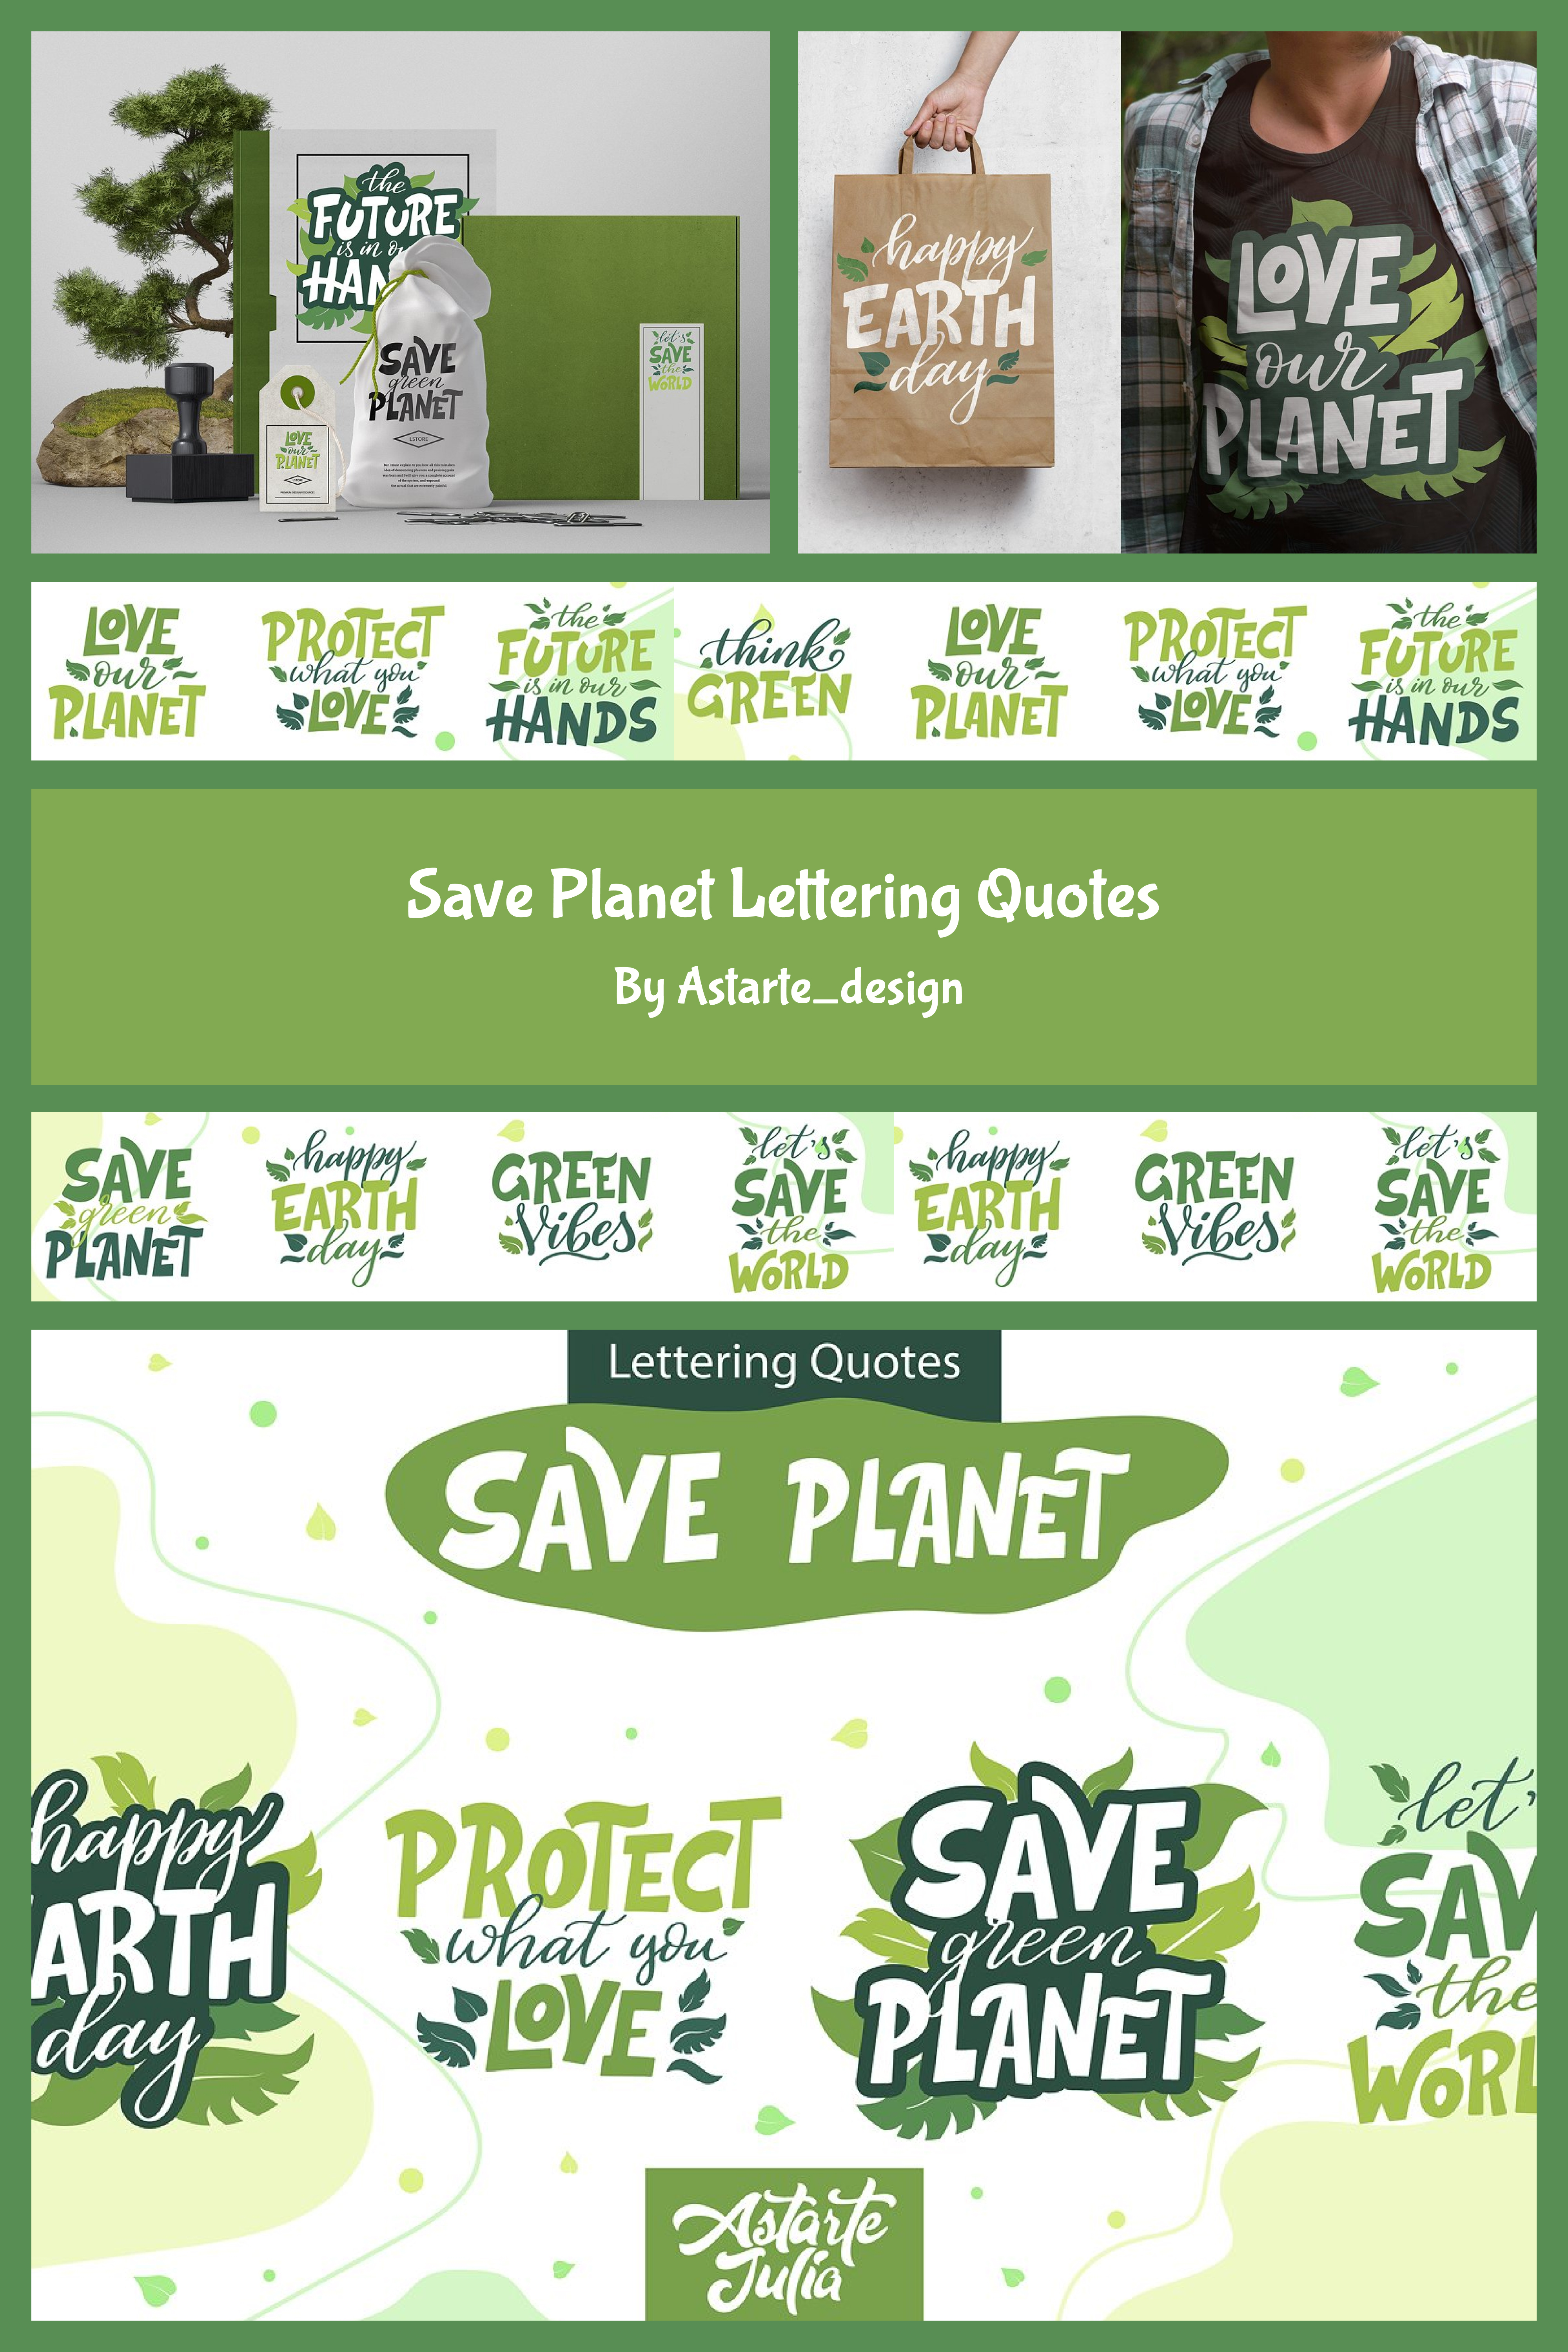 Pinterest illustrations save planet lettering quotes.